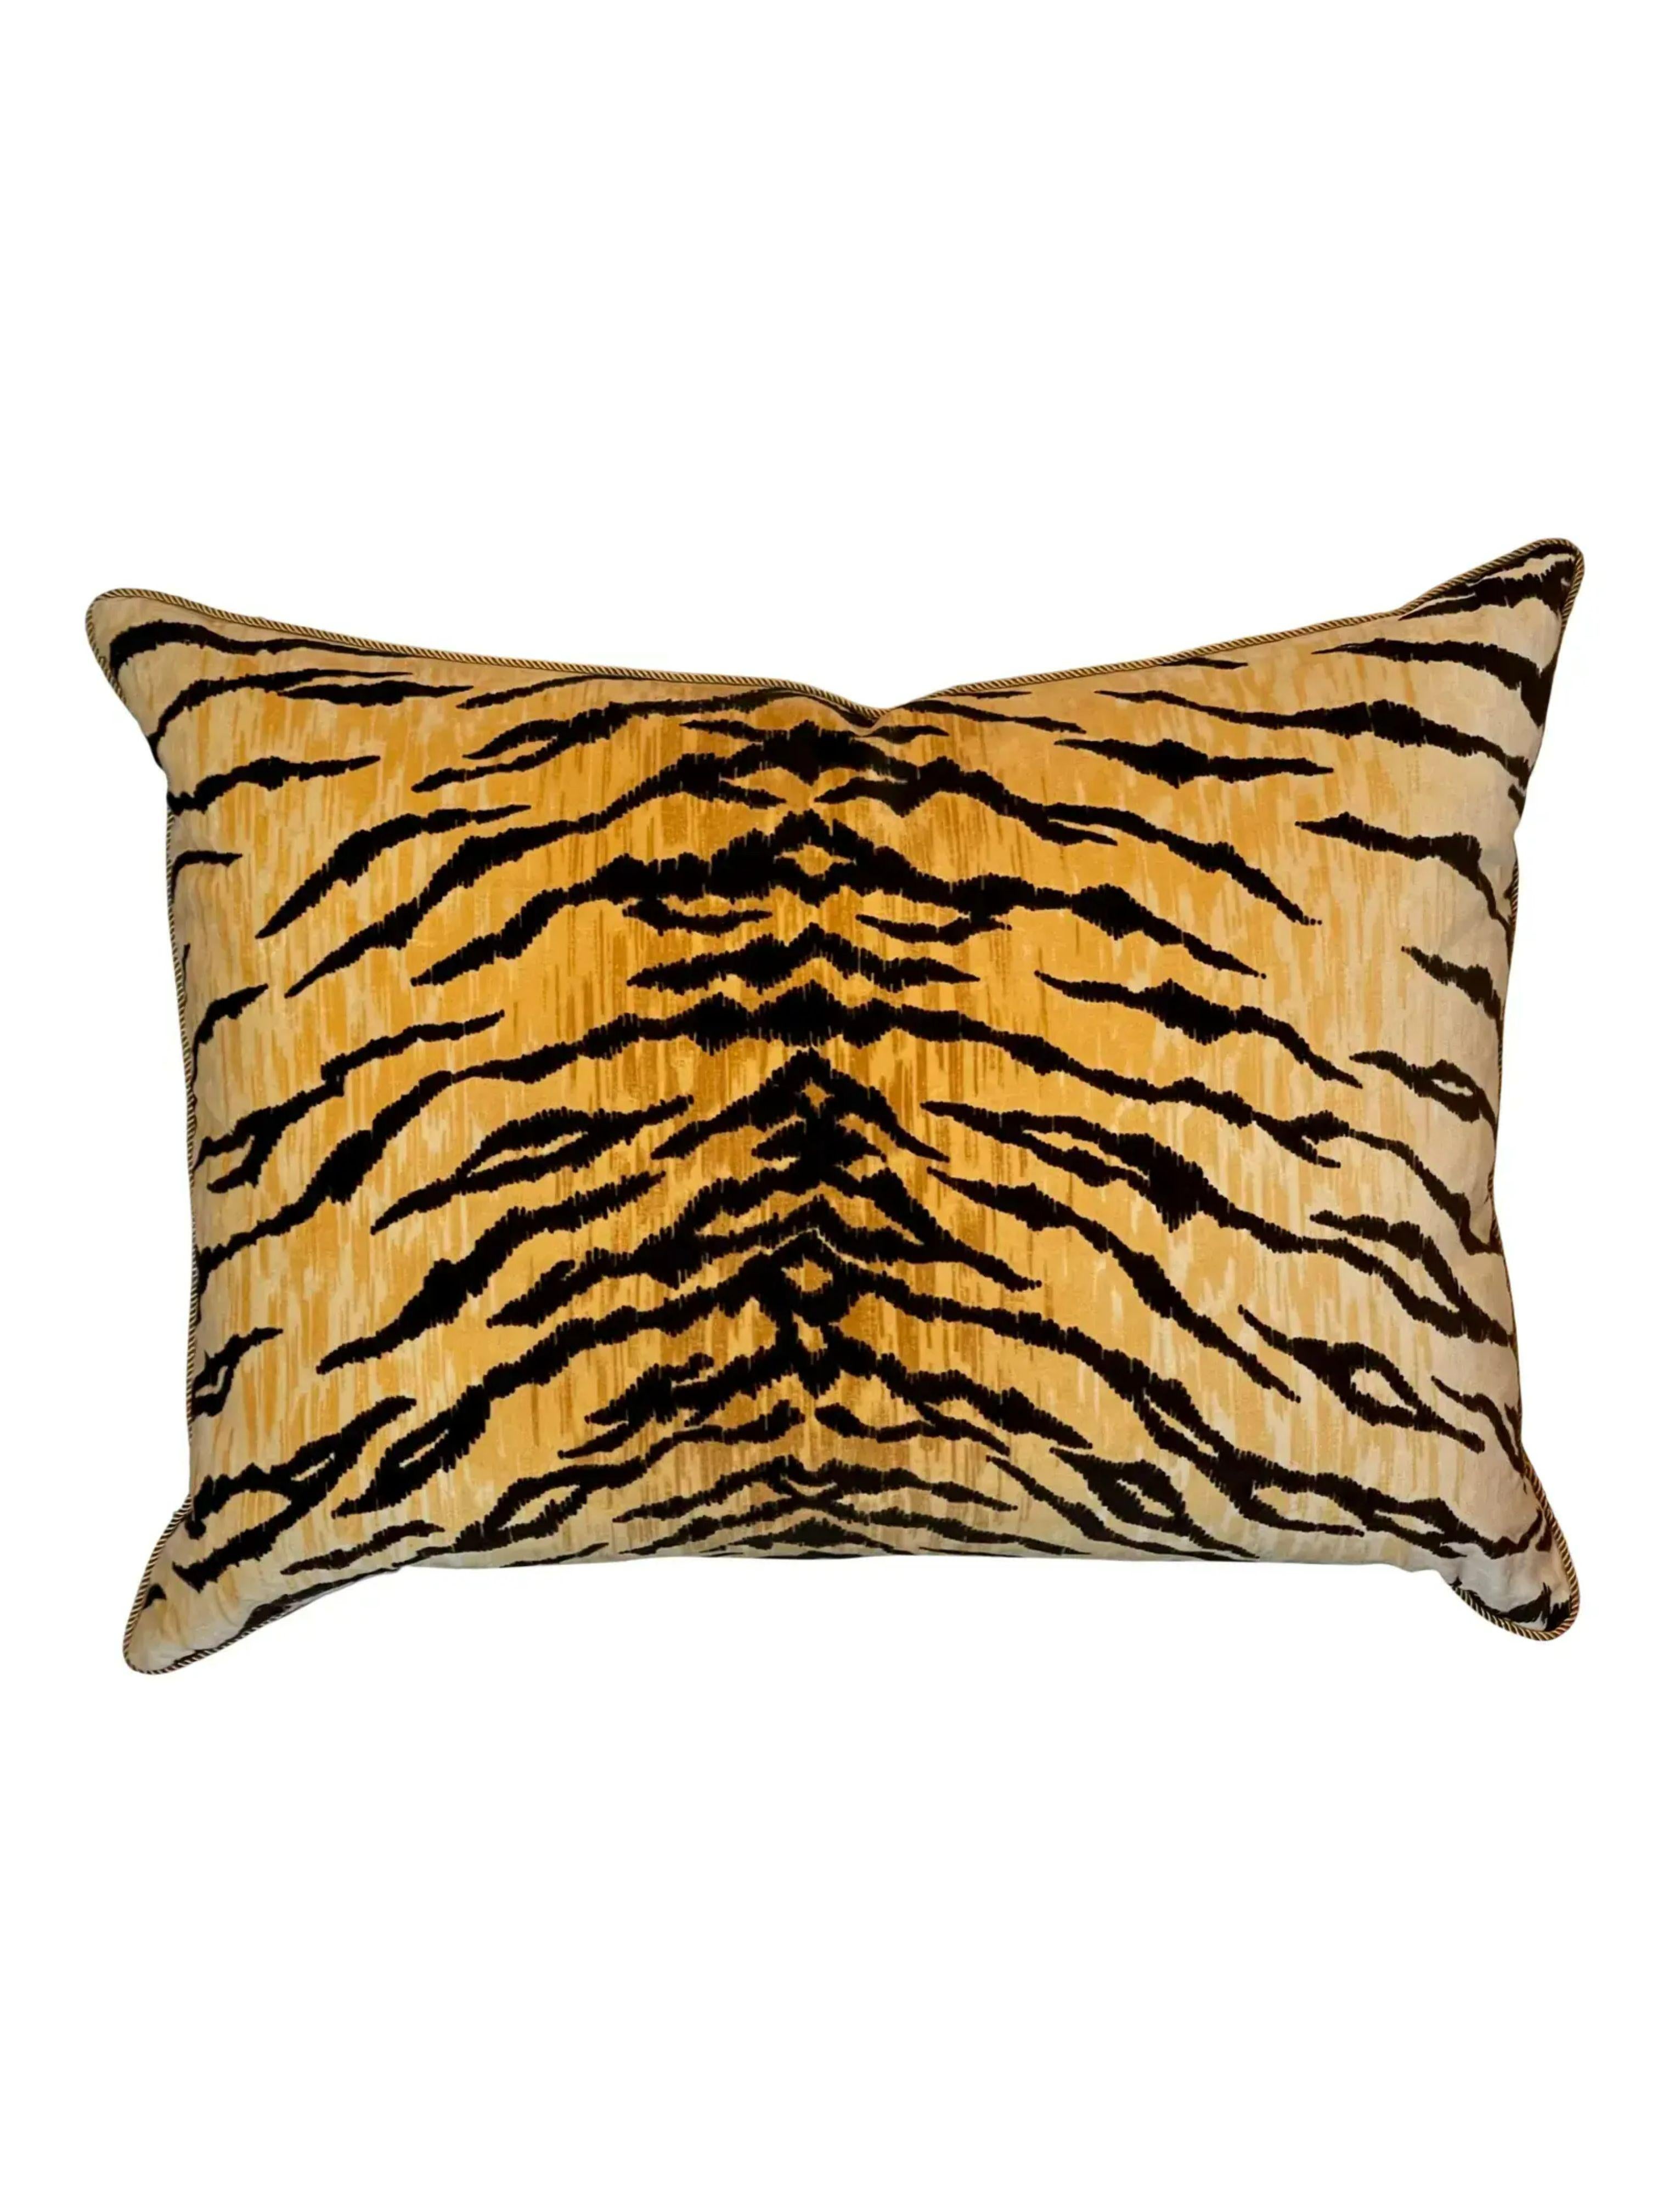 Clarence House Tiger Velvet Silk Down Feather Pillow, 2010s 1